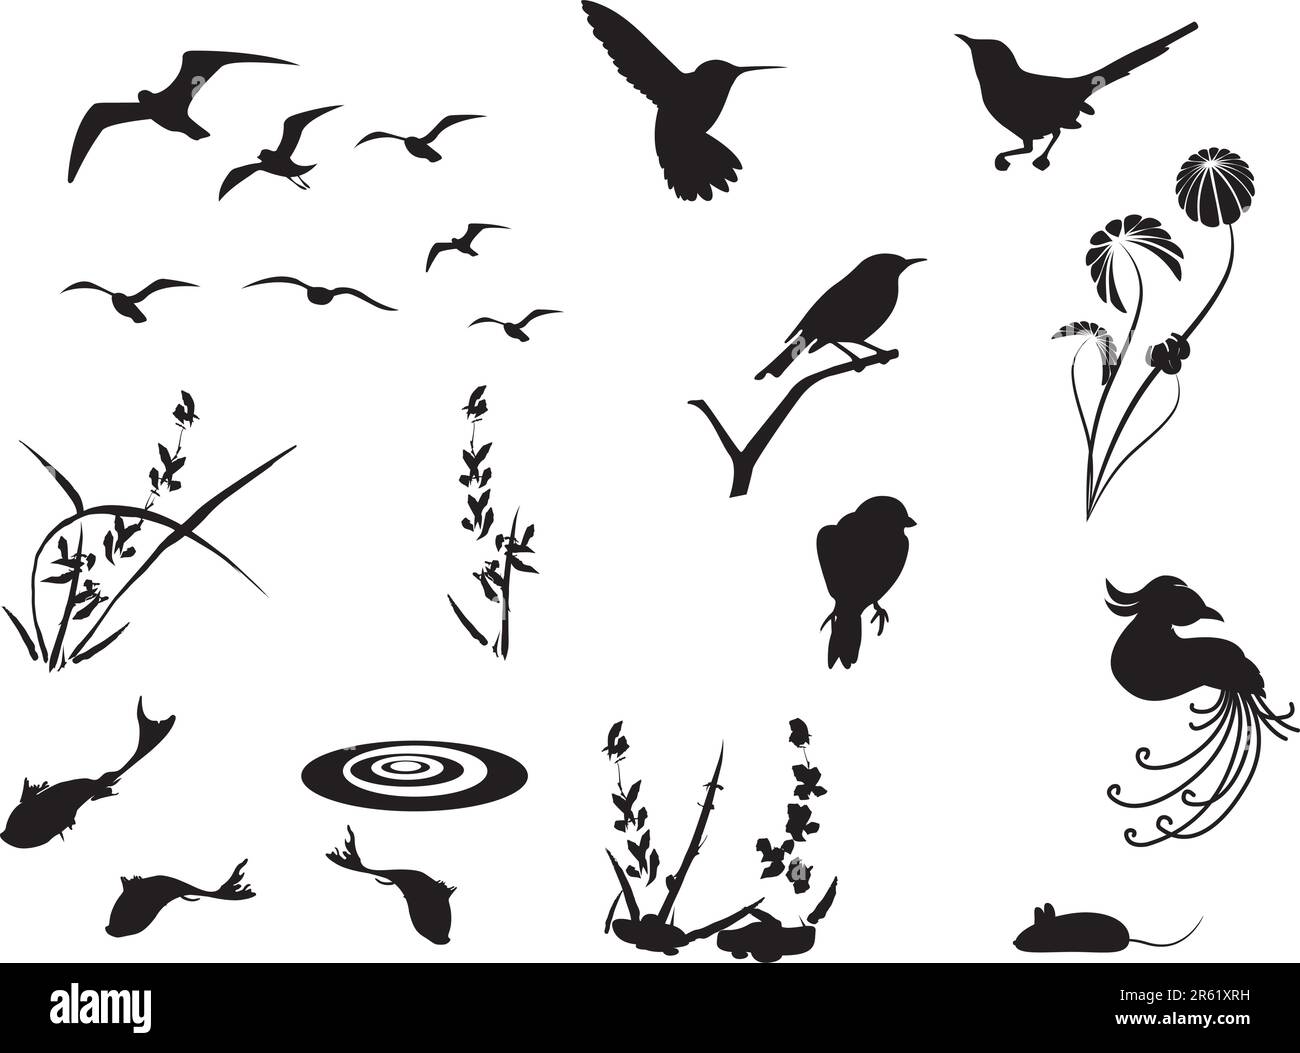 Animal, plant, and floral silhouettes. Stock Vector